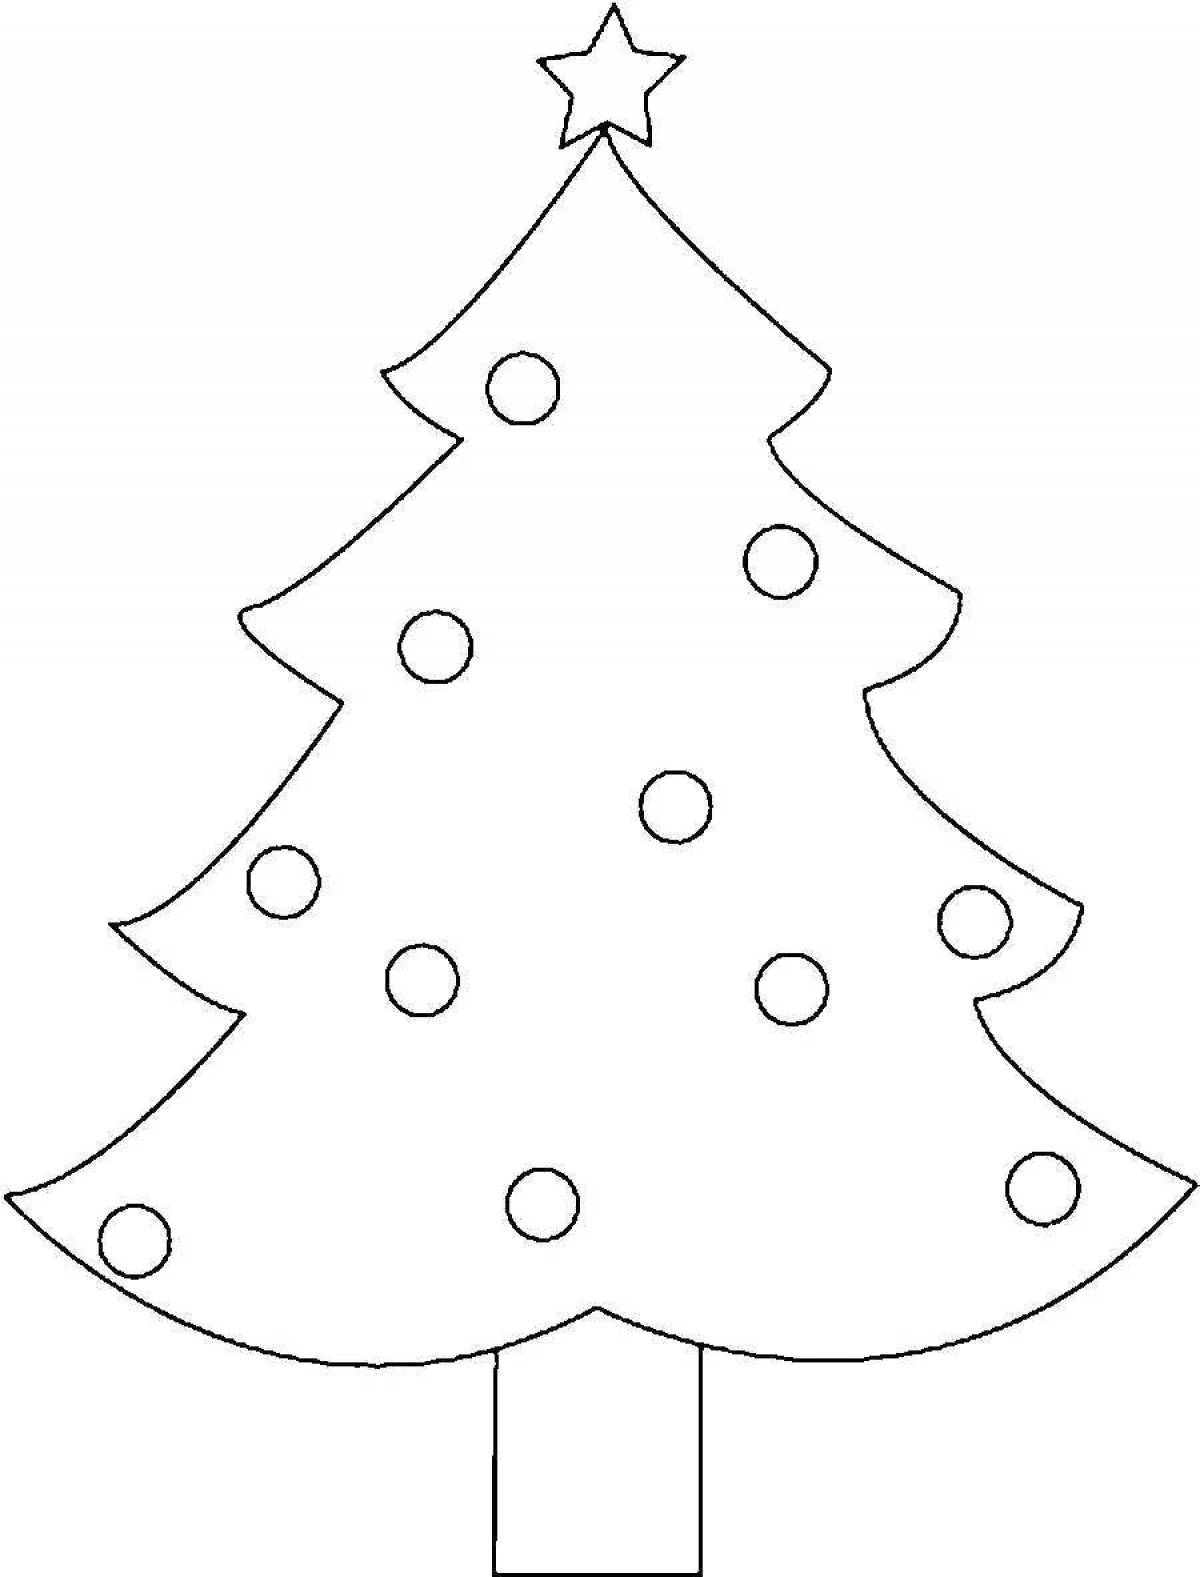 Adorable Christmas tree stencil coloring page